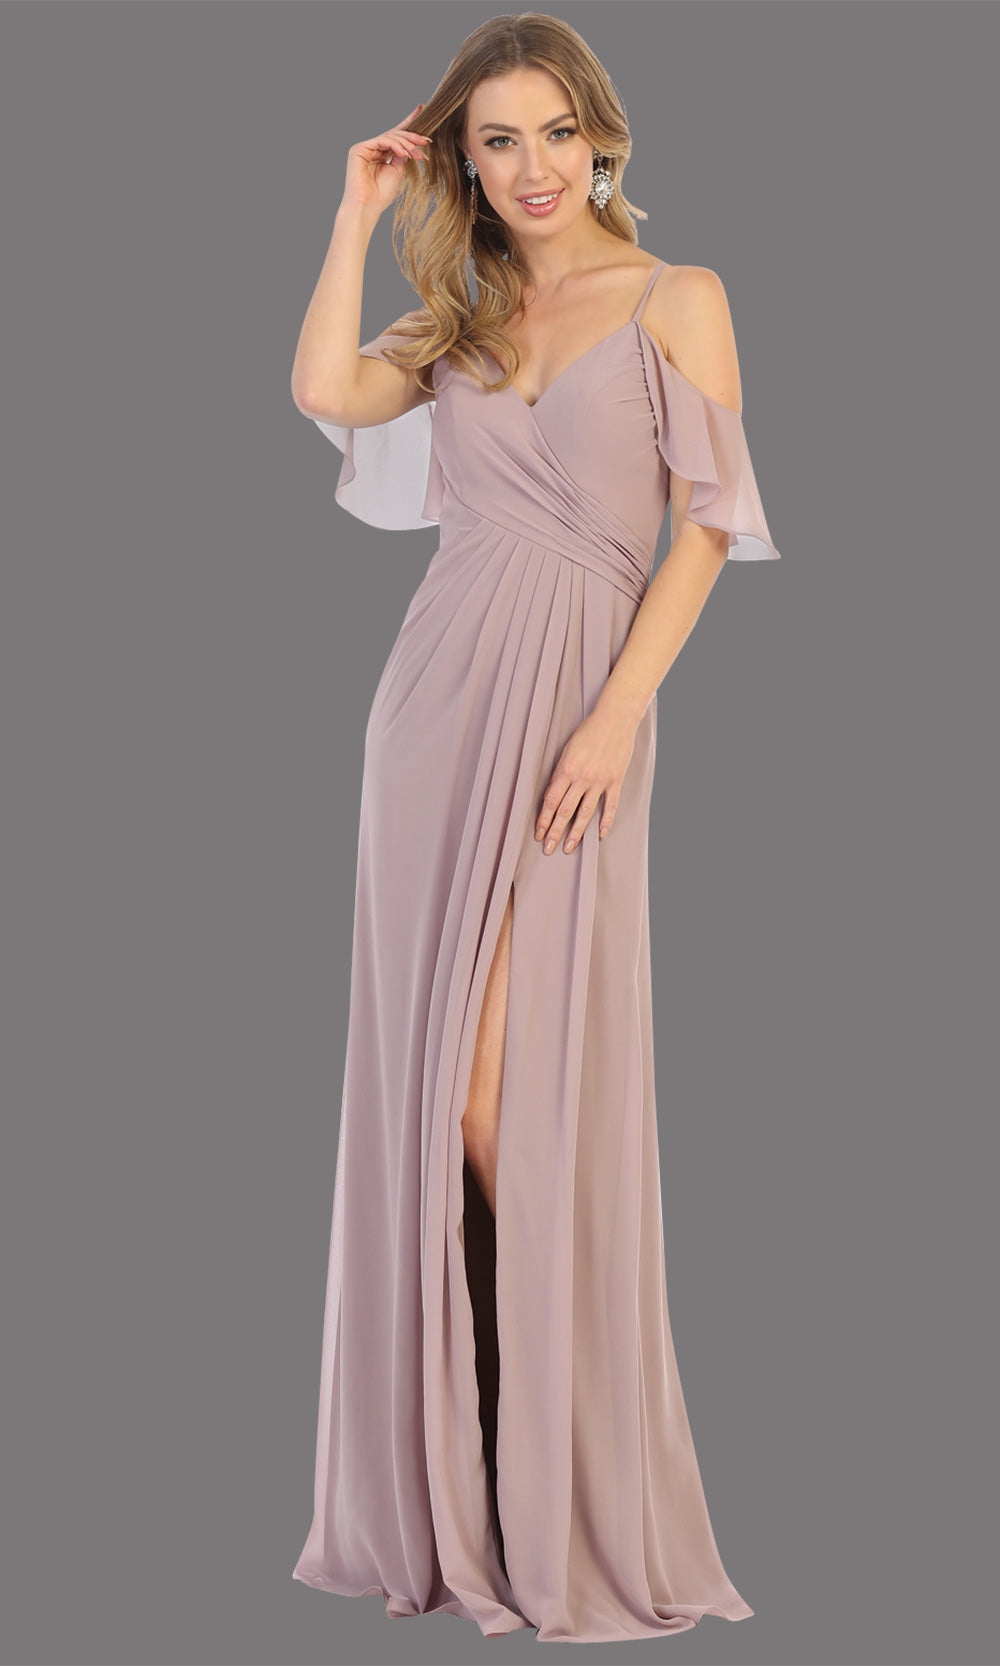 Mayqueen MQ1732 long mauve pink flowy, a-line chiffon dress w/cold shoulder & high slit. This dusty rose simple dress is perfect as a bridesmaid dress, formal wedding guest dress, destination wedding guest dress, prom dress. Plus sizes avail